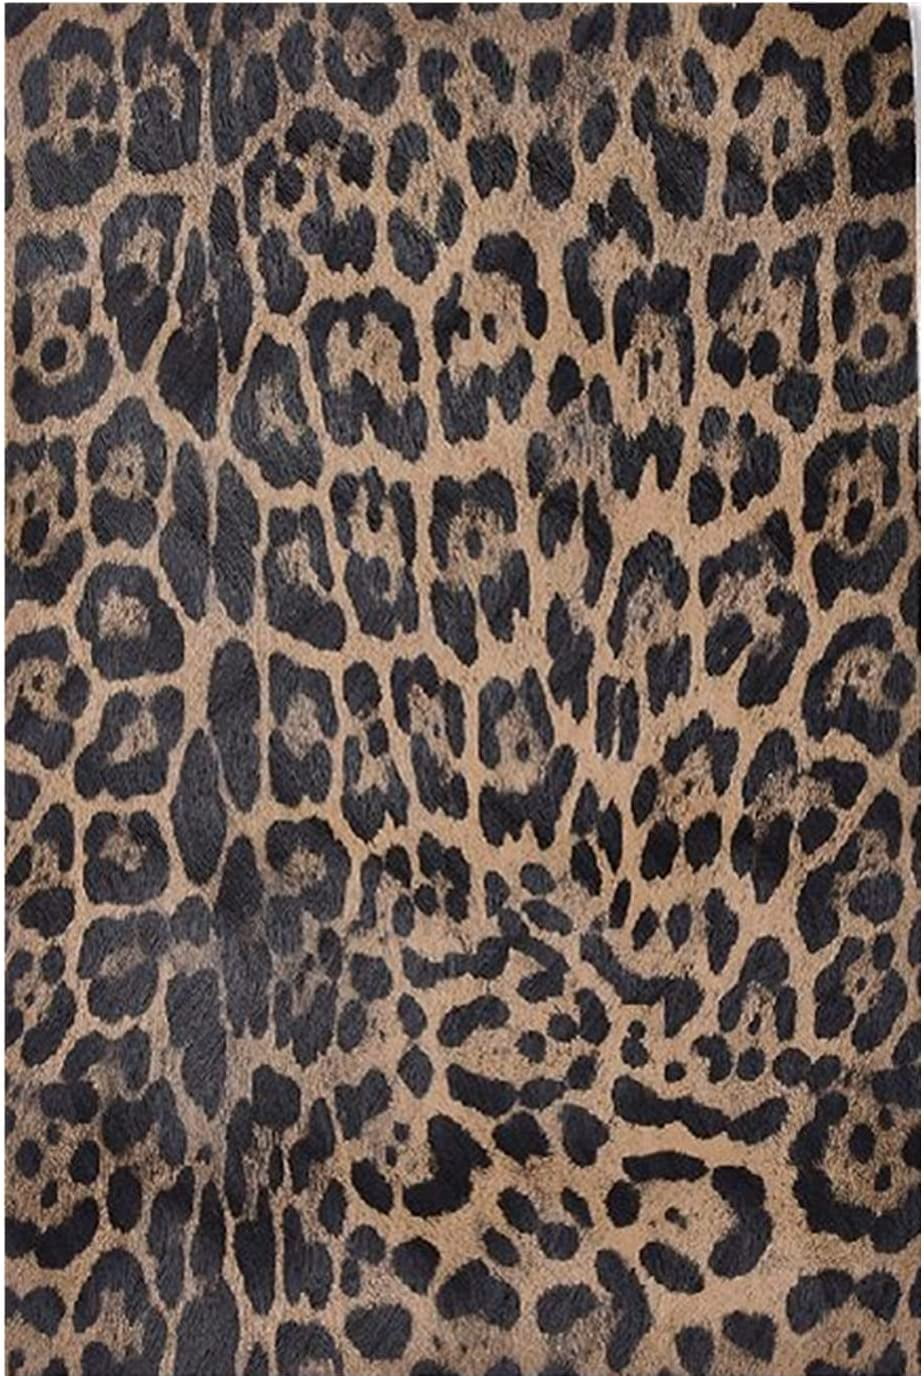 Printed Faux Leather Sheet Leopard Pattern Synthetic Leather Self-Adhesive  Back for Earring,Jewelry Making,Purse,Scrapbook Pages,Pencil Cases, Crafts